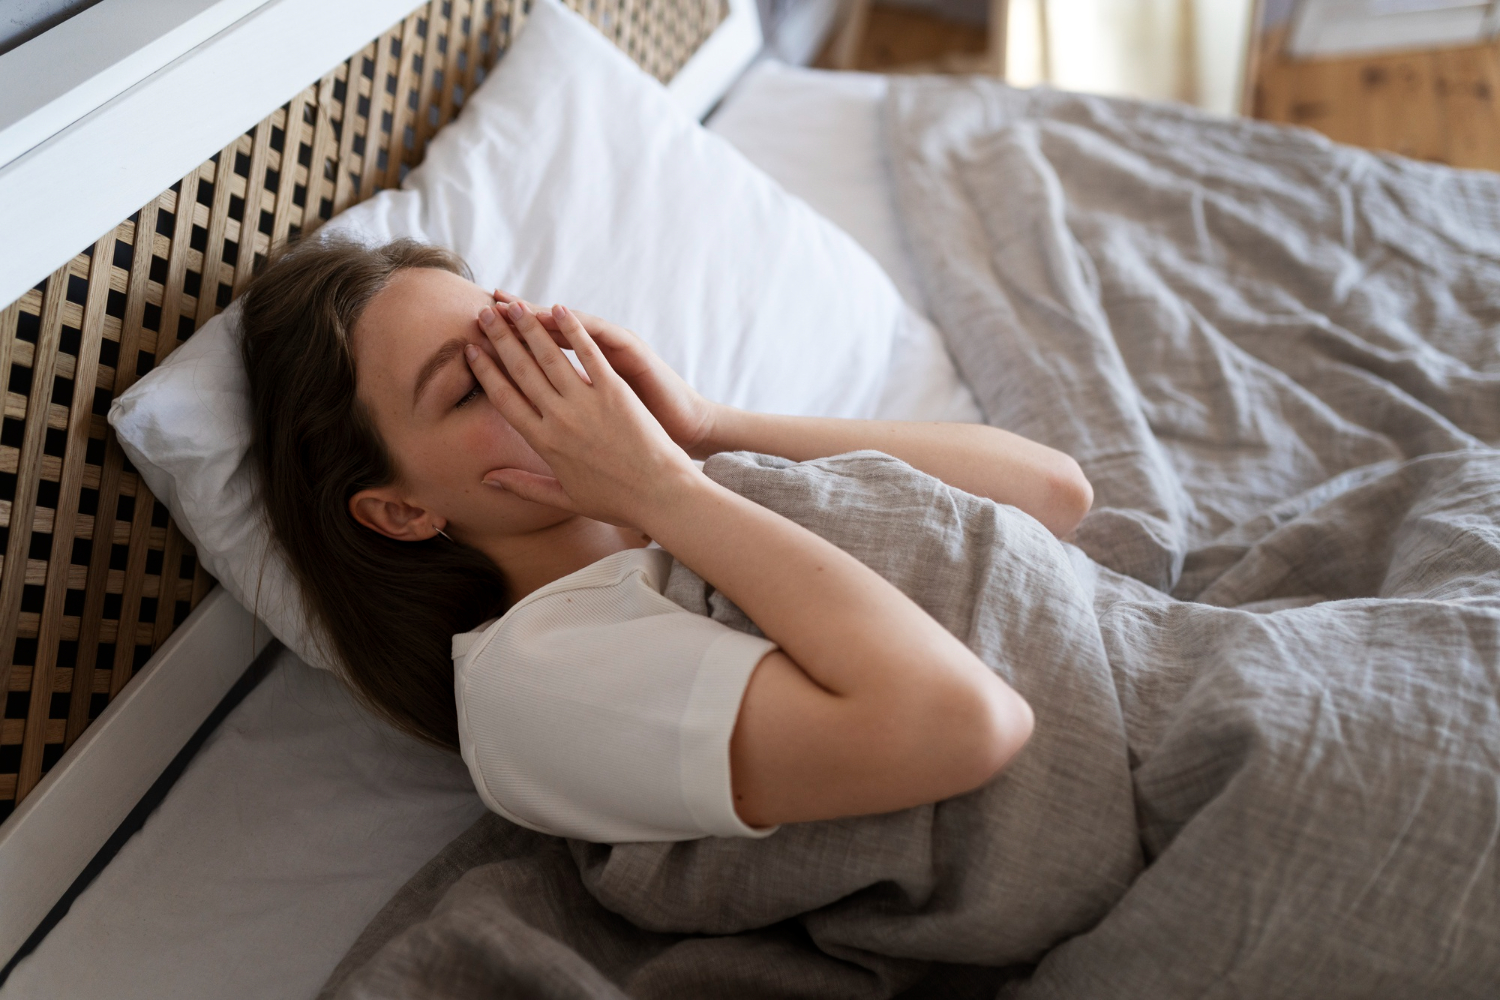 What Are the Warning Signs of Sleep Apnea? 20 cases